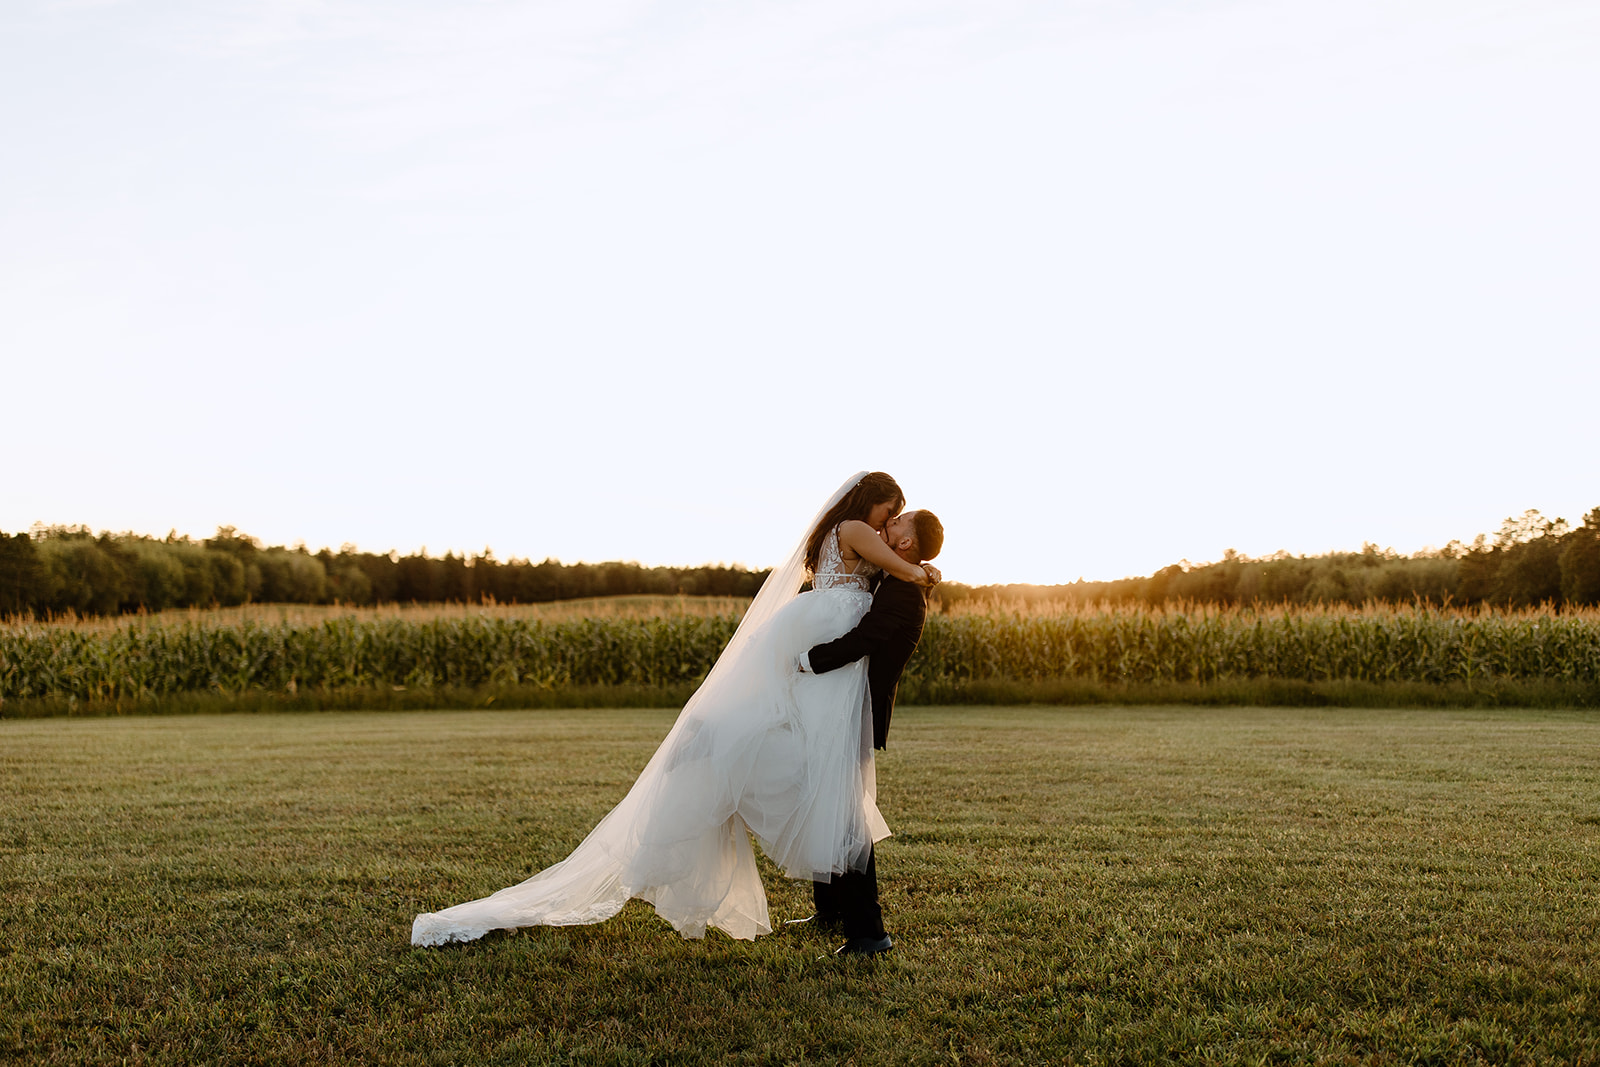 Groom lifts his bride in front of the sunset